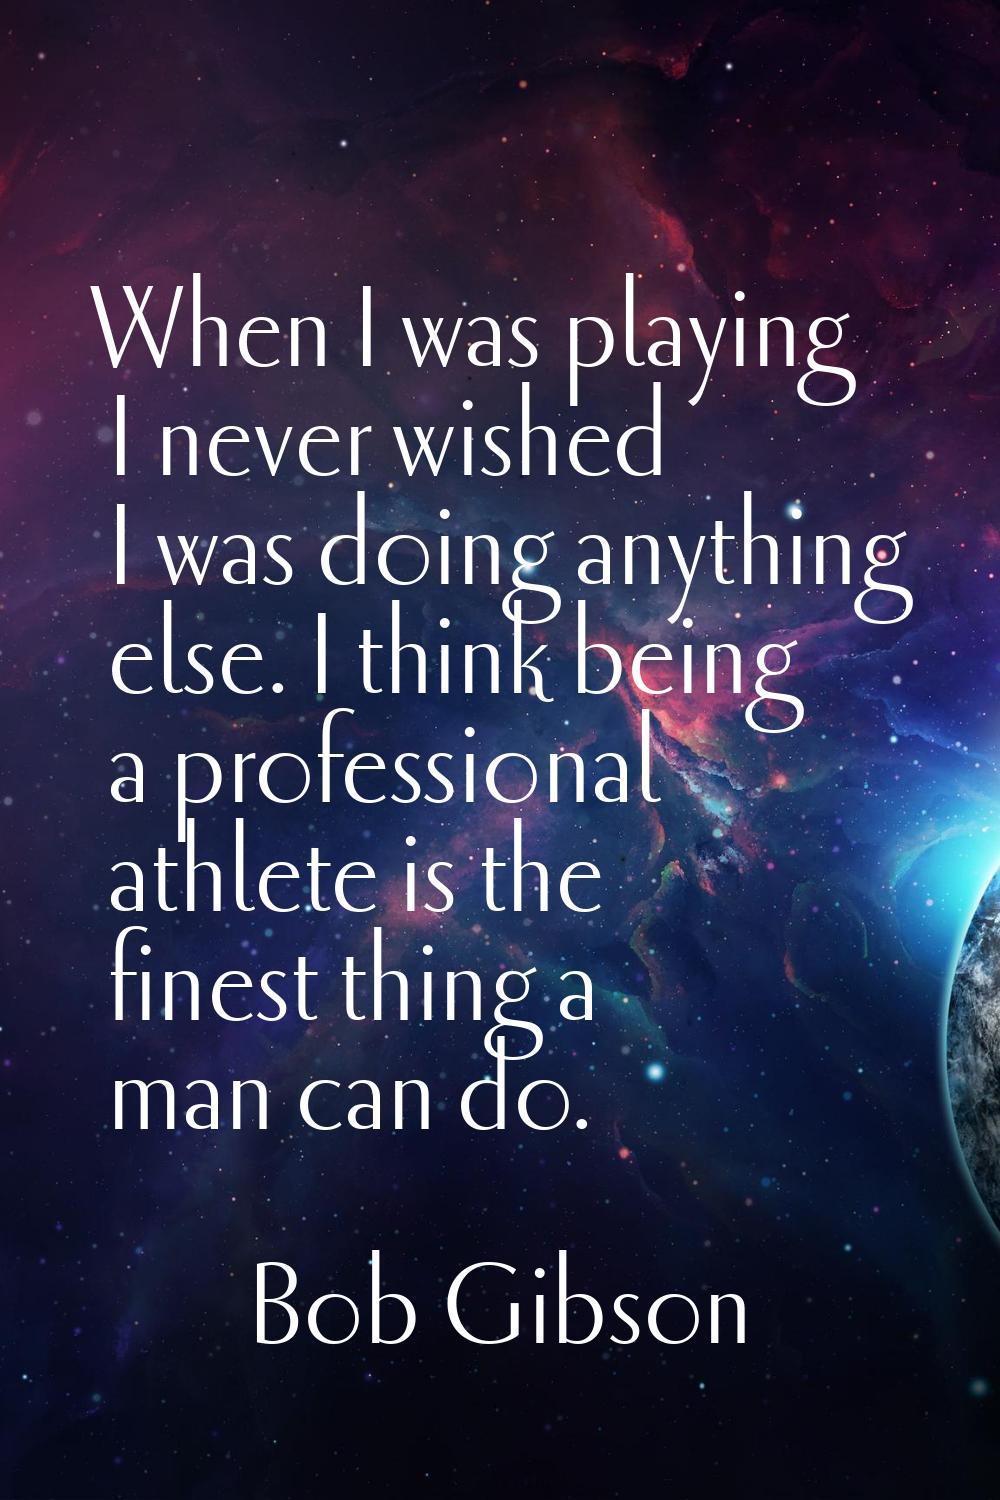 When I was playing I never wished I was doing anything else. I think being a professional athlete i